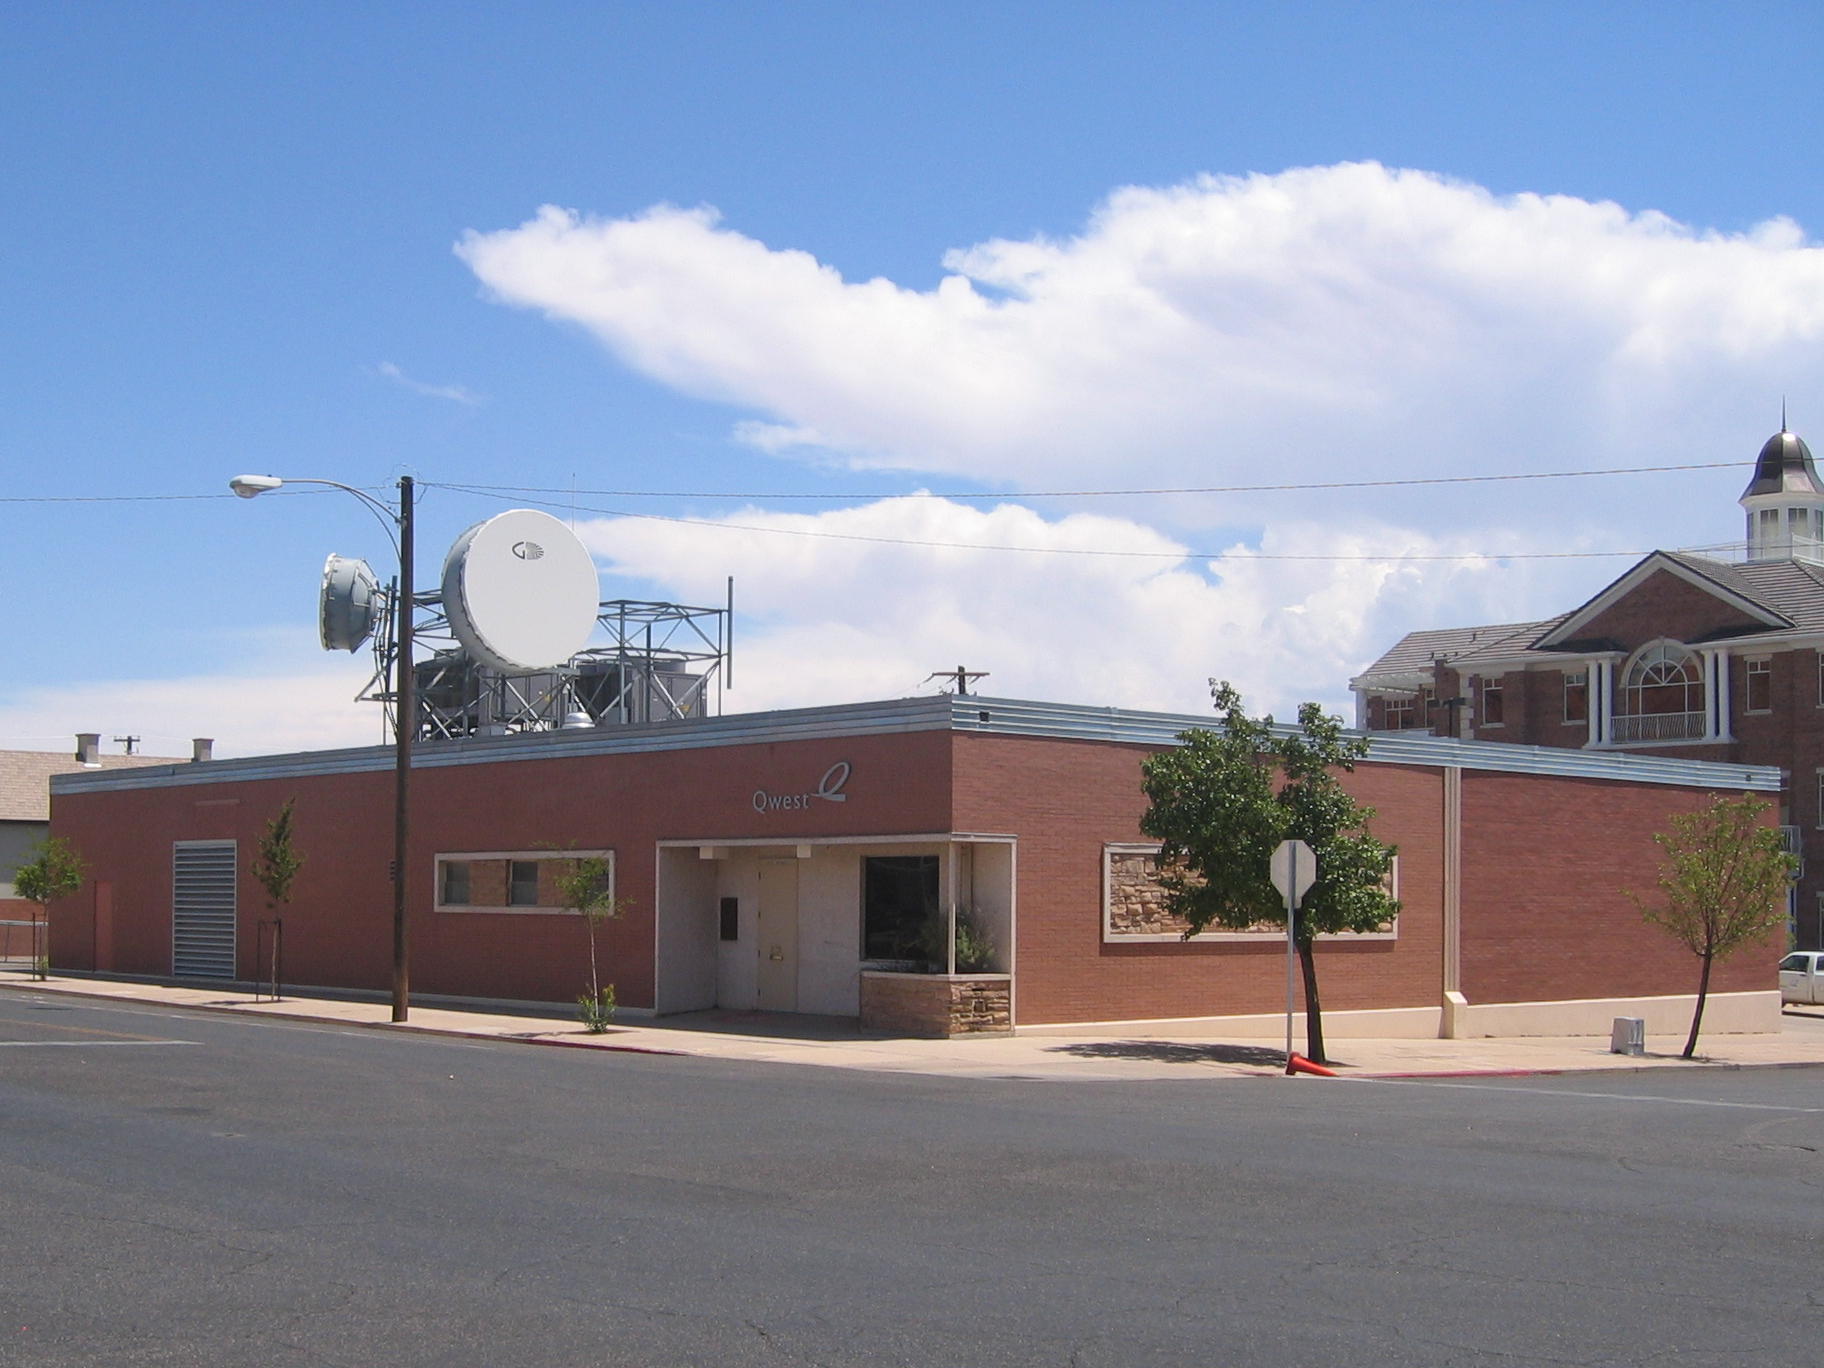 Telephone switching office in downtown St. George